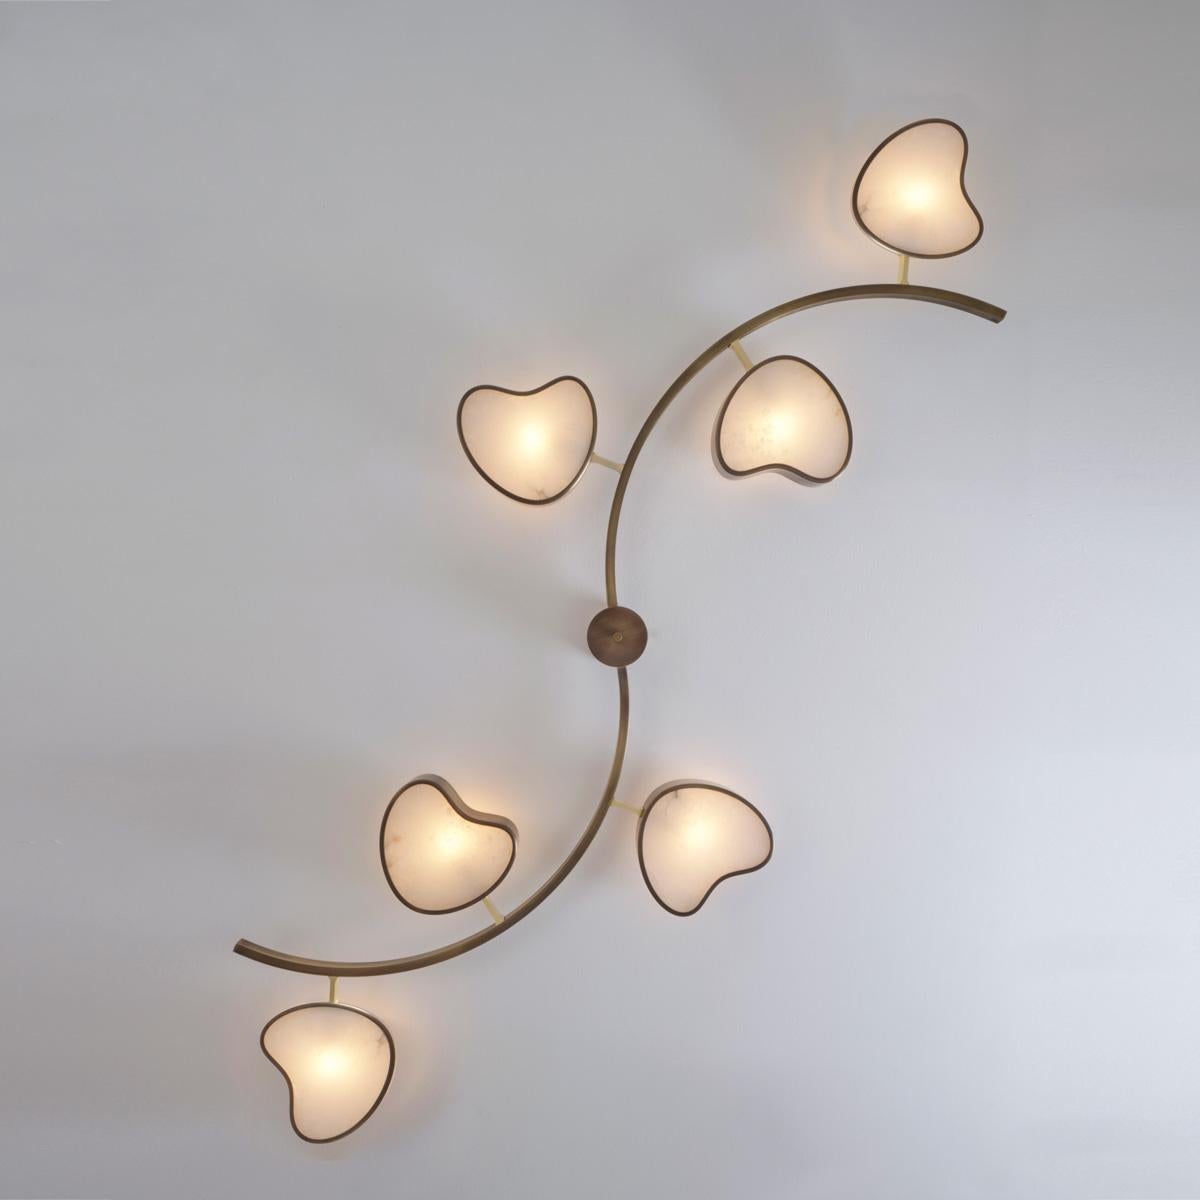 Cuore N.6 Ceiling Light by Gaspare Asaro. Bronze and Satin Brass Finish For Sale 2